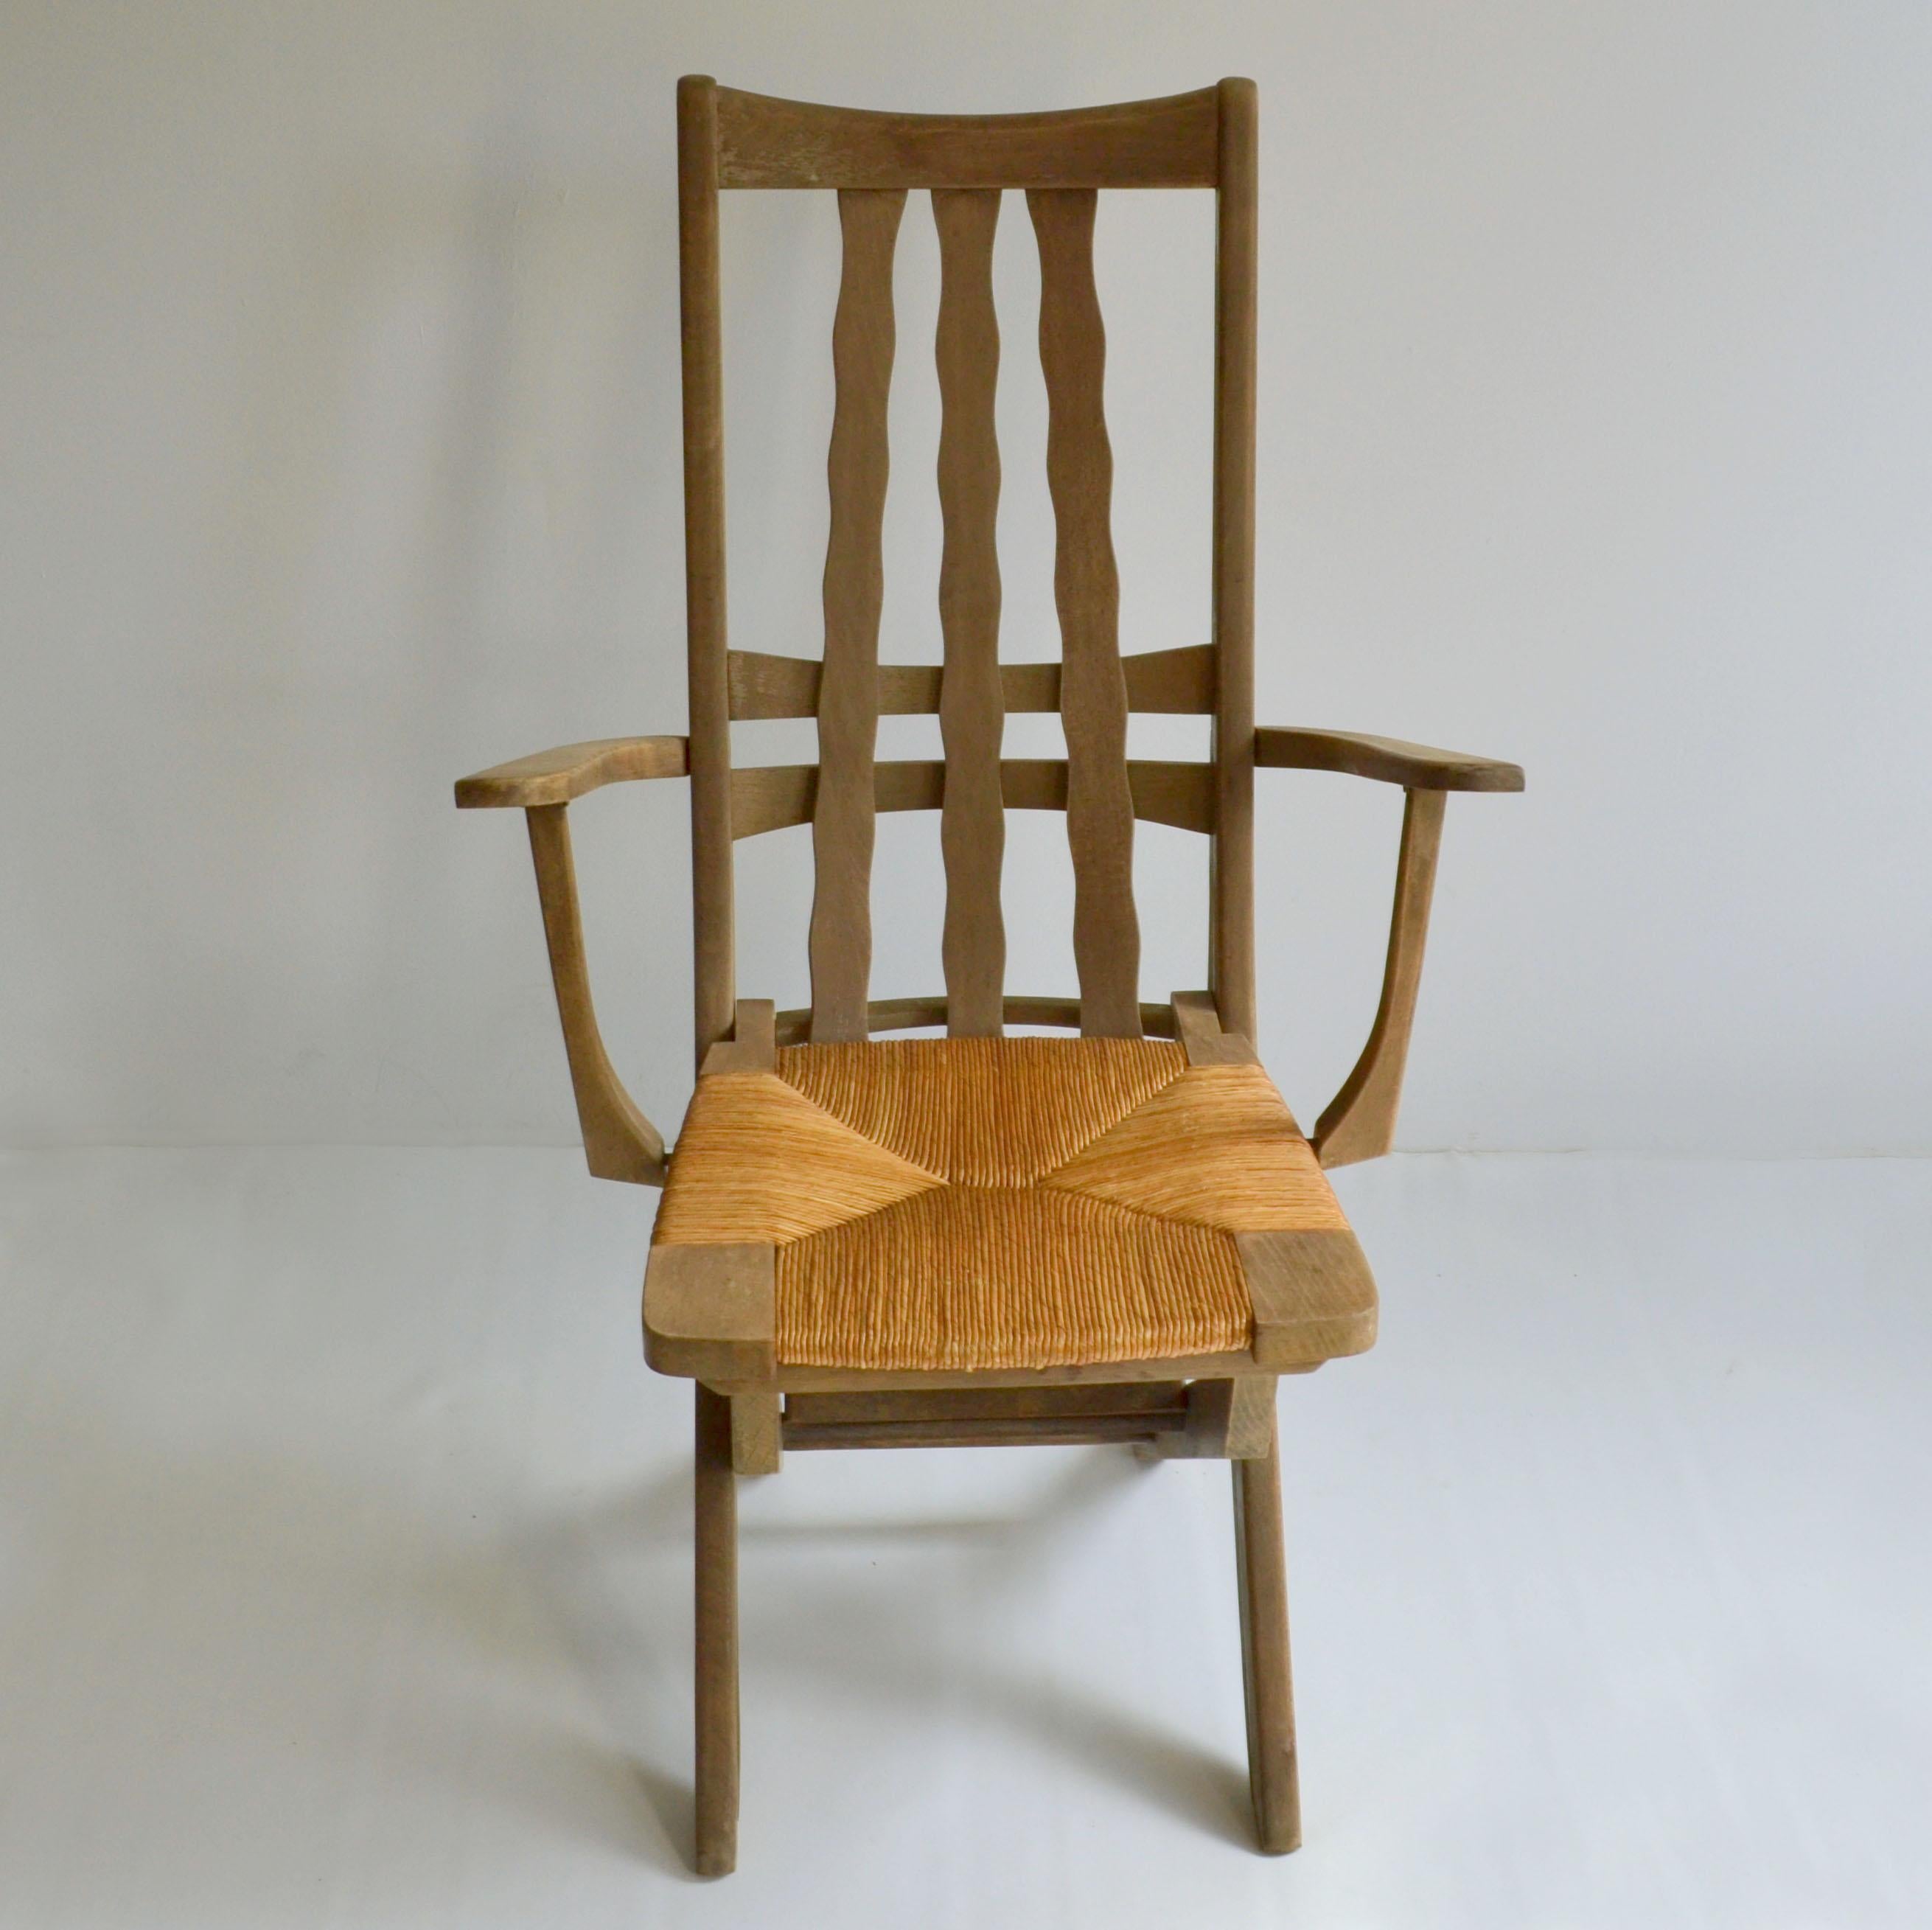 Mid-20th Century Pair of French Modernist Outdoor Oak Chairs, French, 1950s For Sale